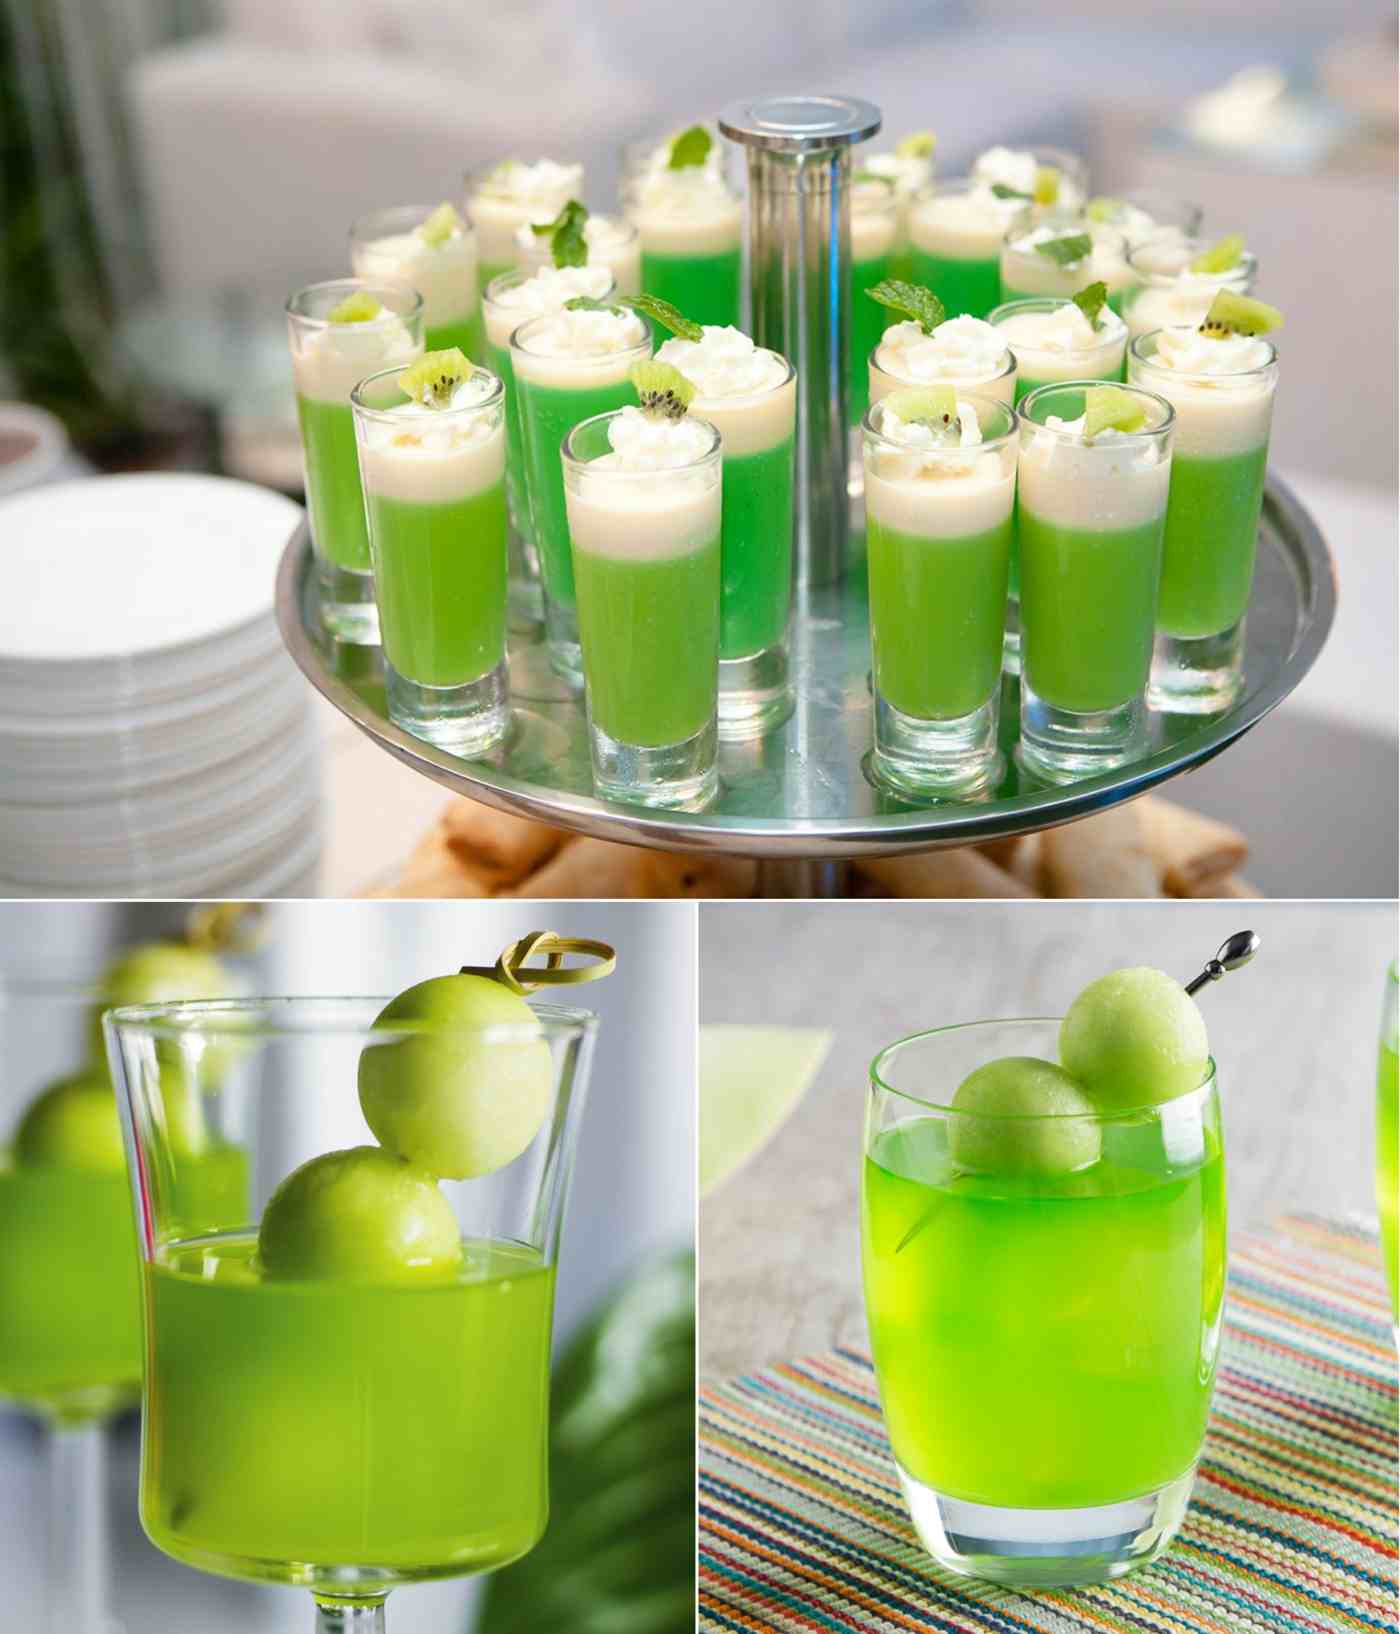 Melon liqueur with vodka and pineapple juice, serving with the melon ball